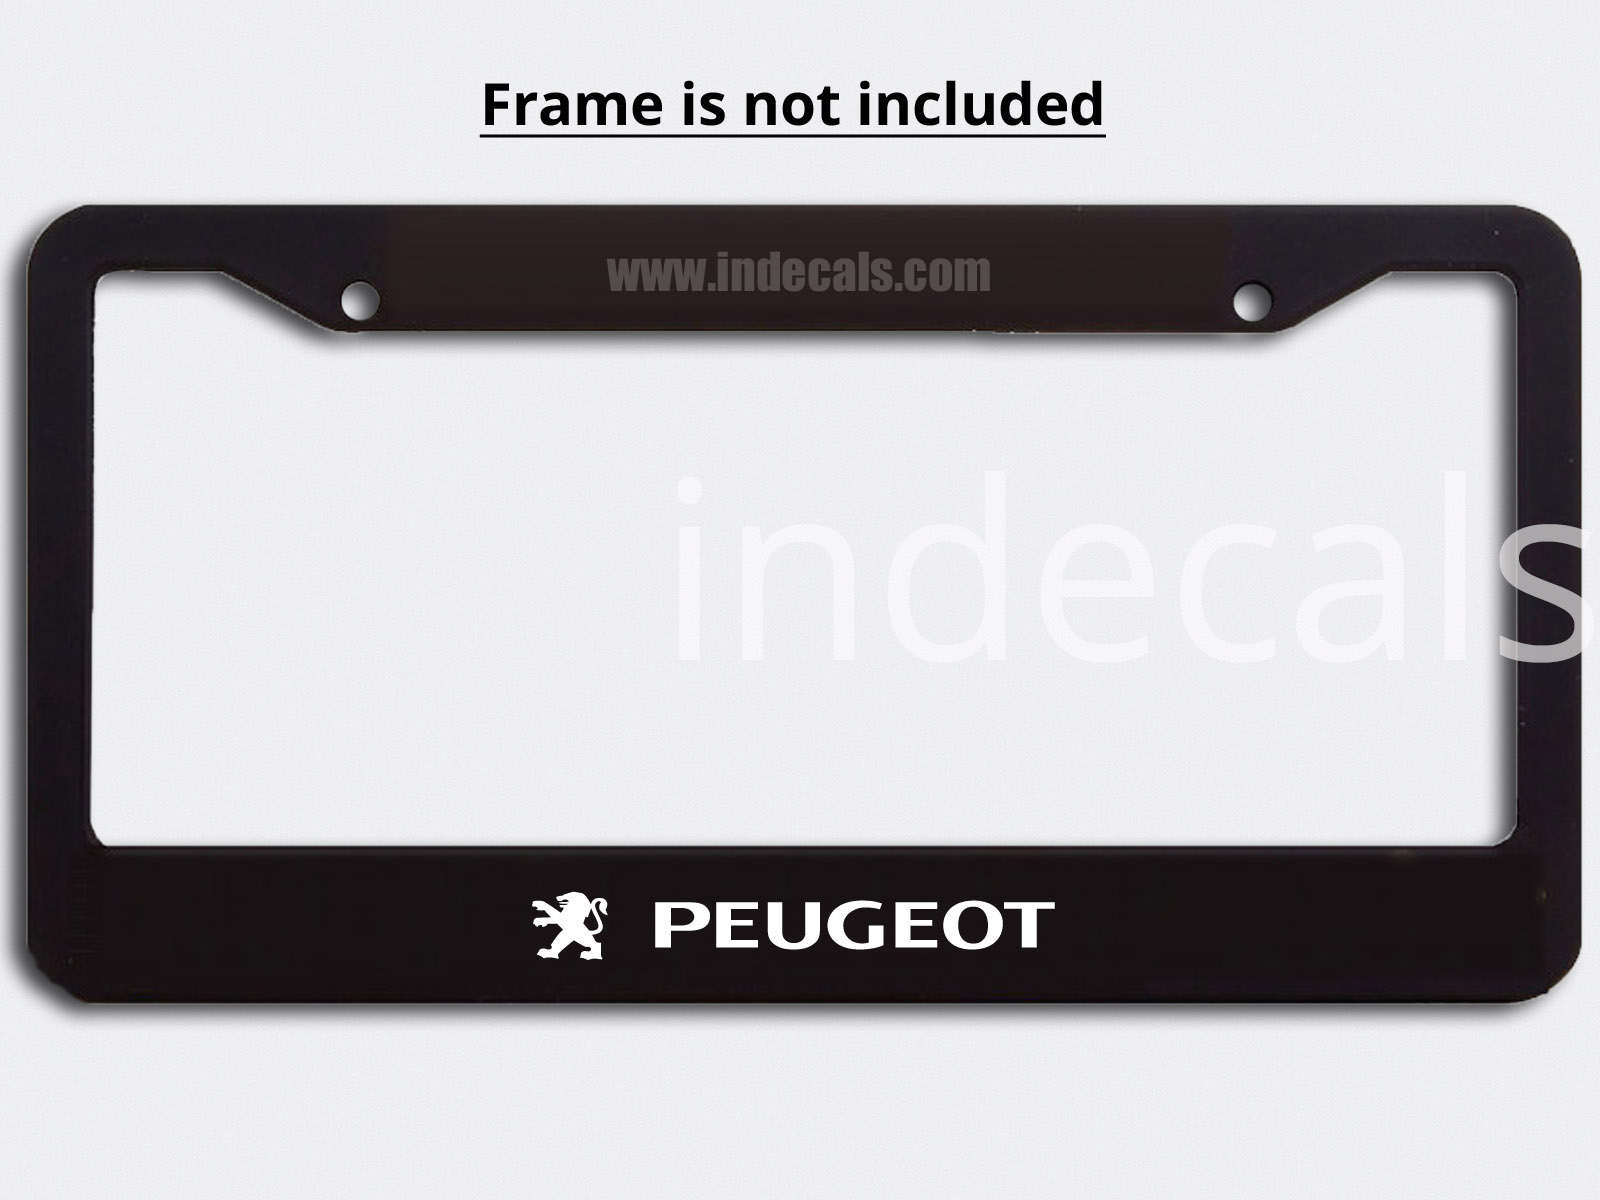 3 x Peugeot Stickers for Plate Frame - White